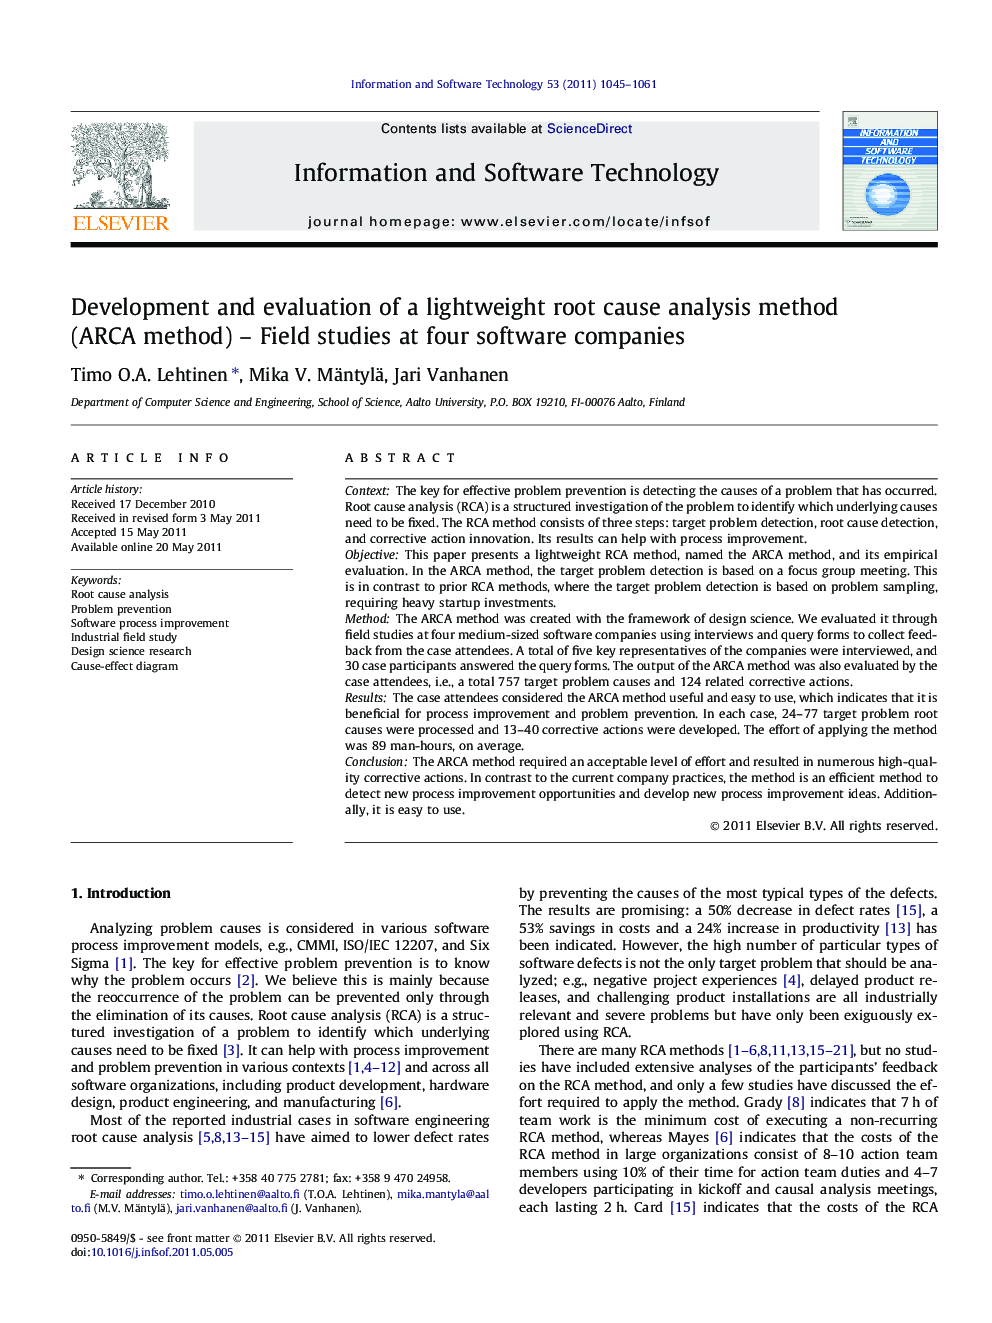 Development and evaluation of a lightweight root cause analysis method (ARCA method) – Field studies at four software companies